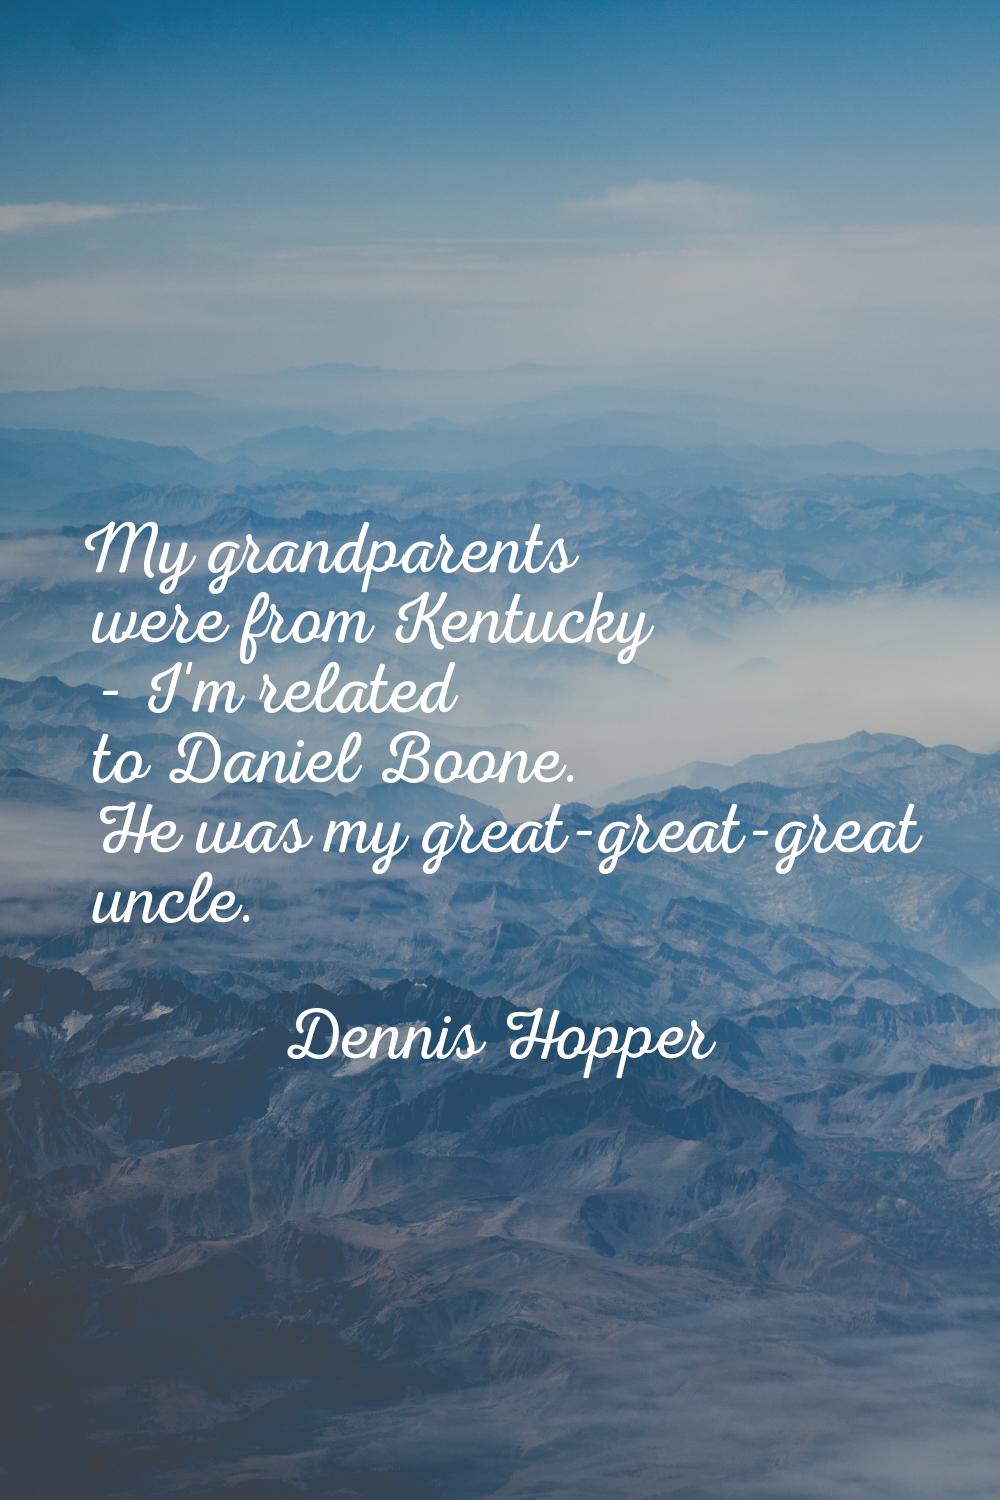 My grandparents were from Kentucky - I'm related to Daniel Boone. He was my great-great-great uncle